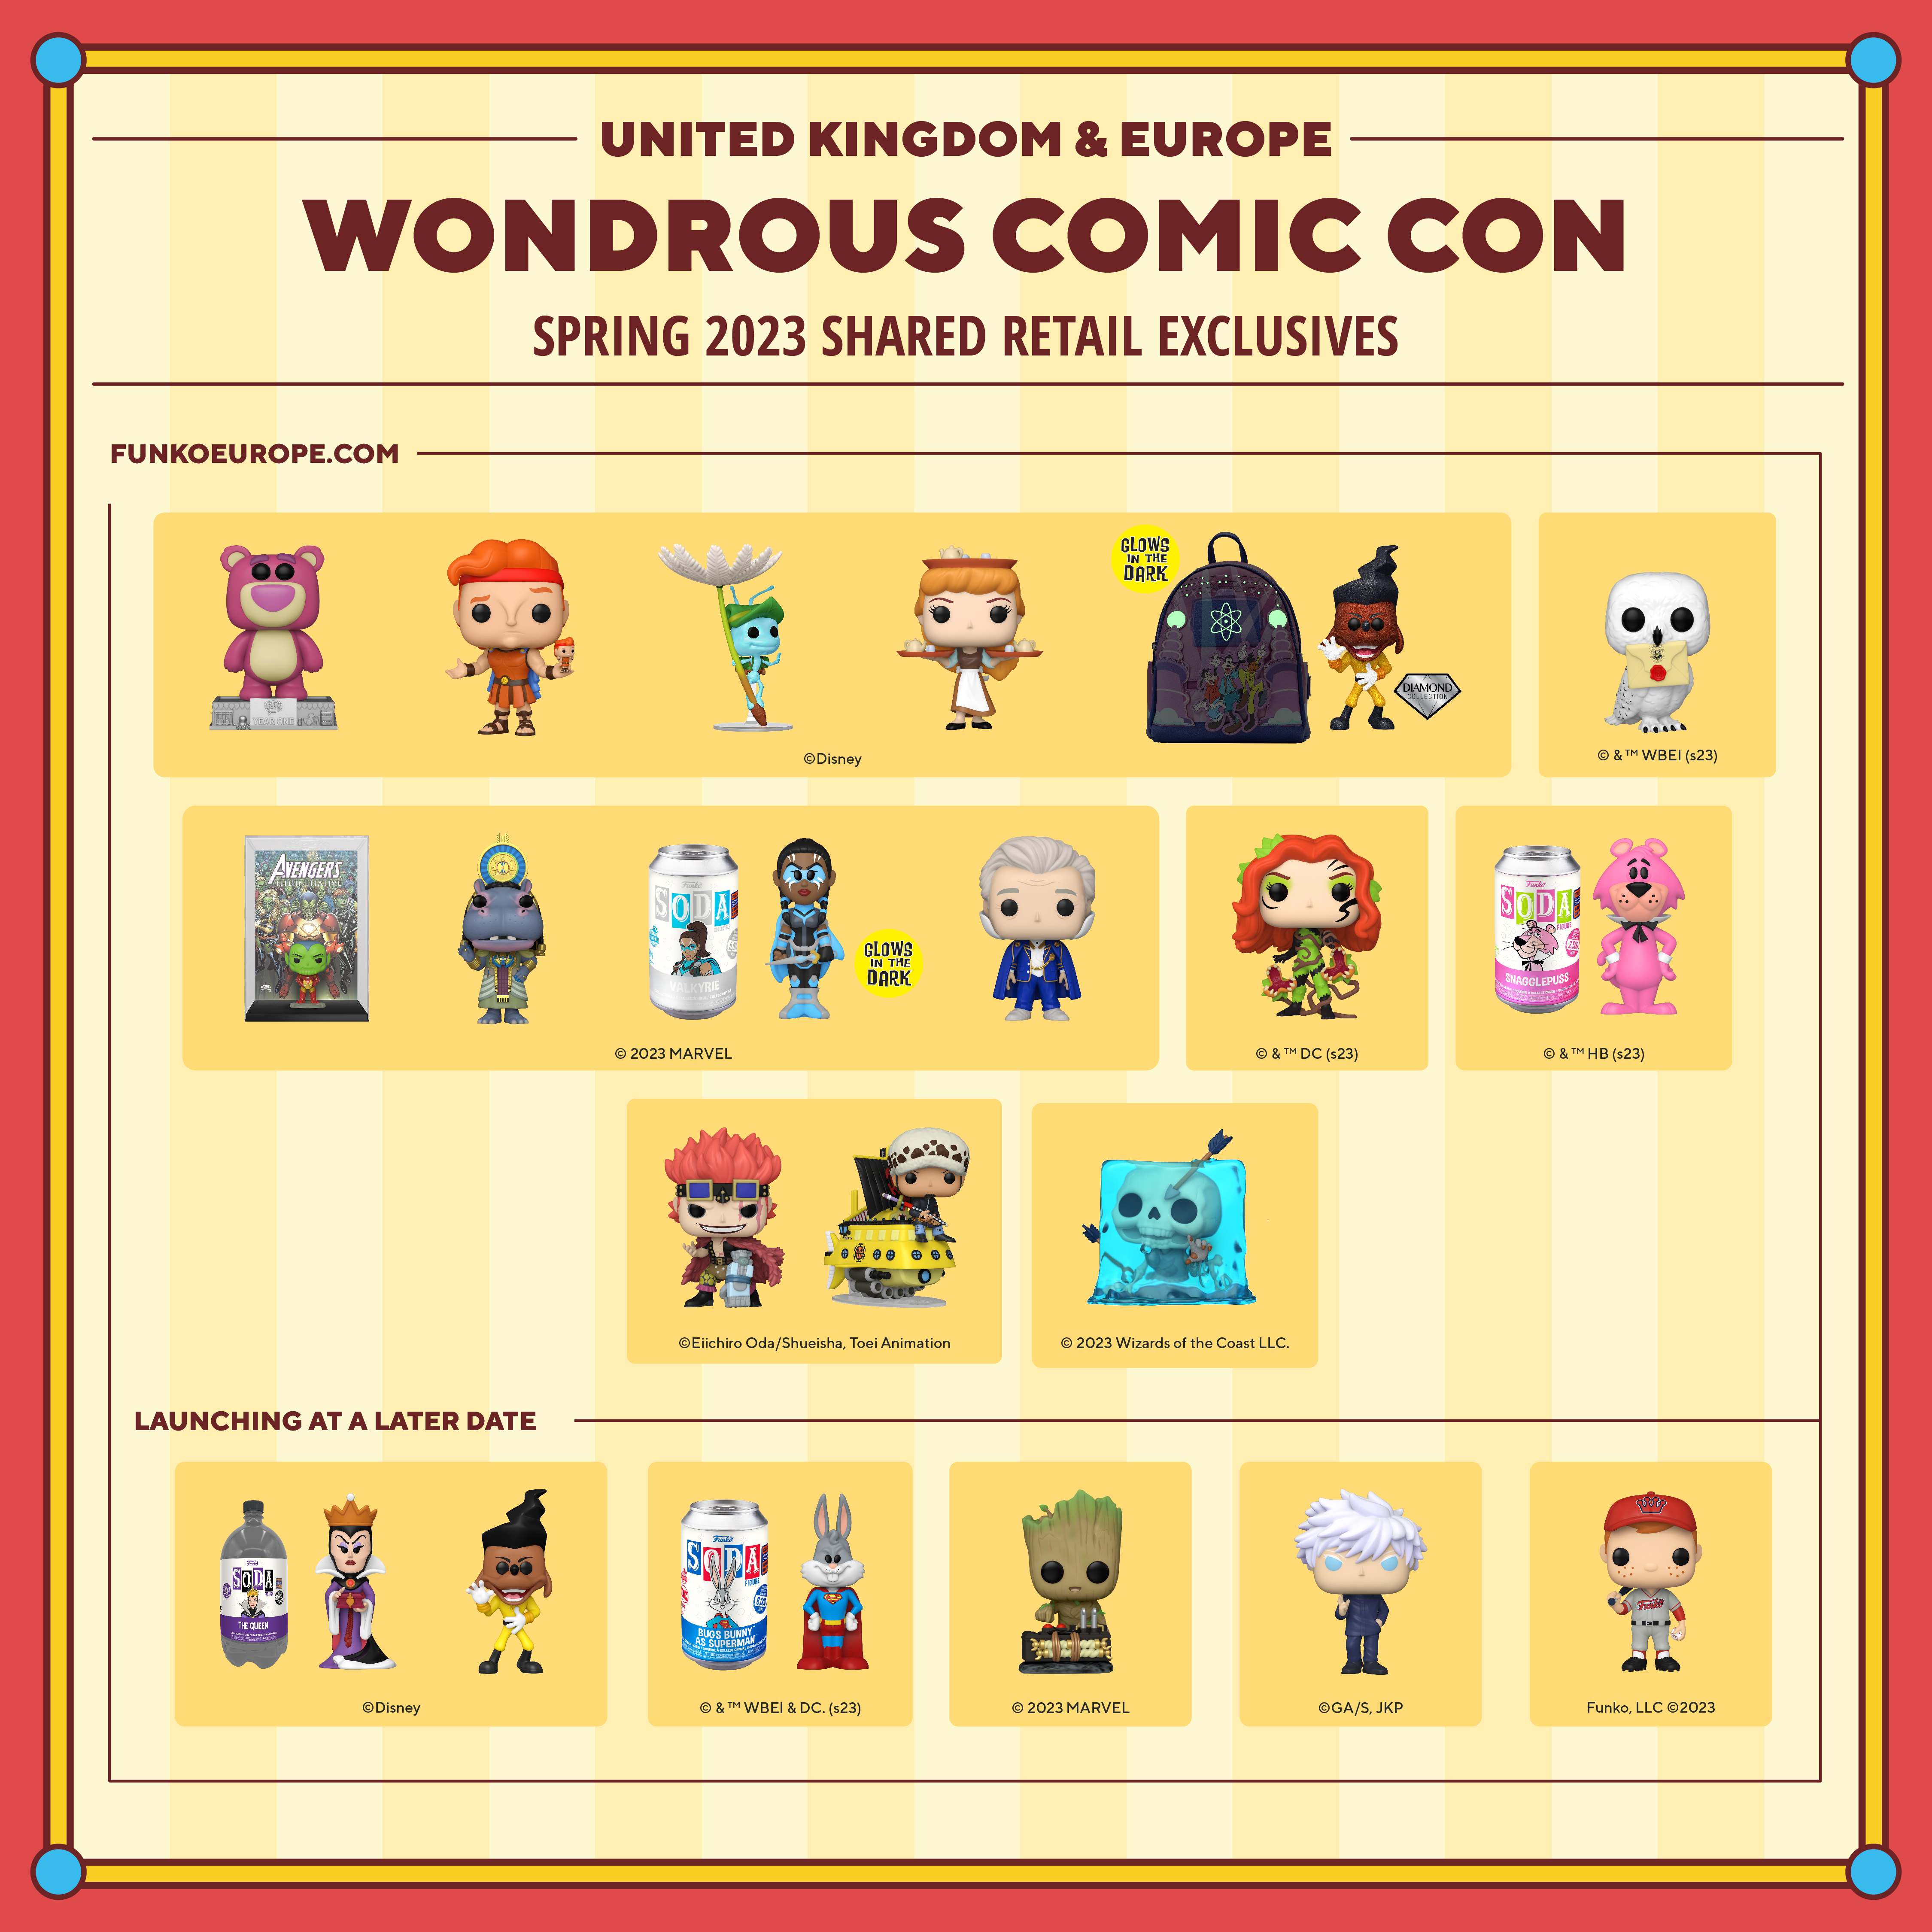 2023 WonderCon United Kingdom & Europe Spring shared retail exclusives. Funkoeurope.com exclusives include: Pop! Classics Lotso Bear, Pop! Hercules with Action Figure, Pop! Flik on Dandelion Seed, Pop! Cinderella with Trays, Powerline Pop! & Bag, Pop! Hedwig, Pop! Comic Cover Skrull as Iron Man, Pop! Taweret, Funko SODA Valkyrie, Pop! Lord Krylar, Pop! Poison Ivy, Funko SODA Snagglepuss, Pop! Eustass Kid, Pop Trafalgar Law on Polar Tang, and Pop! Gelatinous Cube. Launching at a later date: Funko SODA 3-Liter Evil Queen, Pop! Powerline, Funko SODA Buggs Bunny, Pop! Baby Groot with Detonator, Pop! Saturo Gojo, and Pop! Freddy Funko in Baseball Uniform.